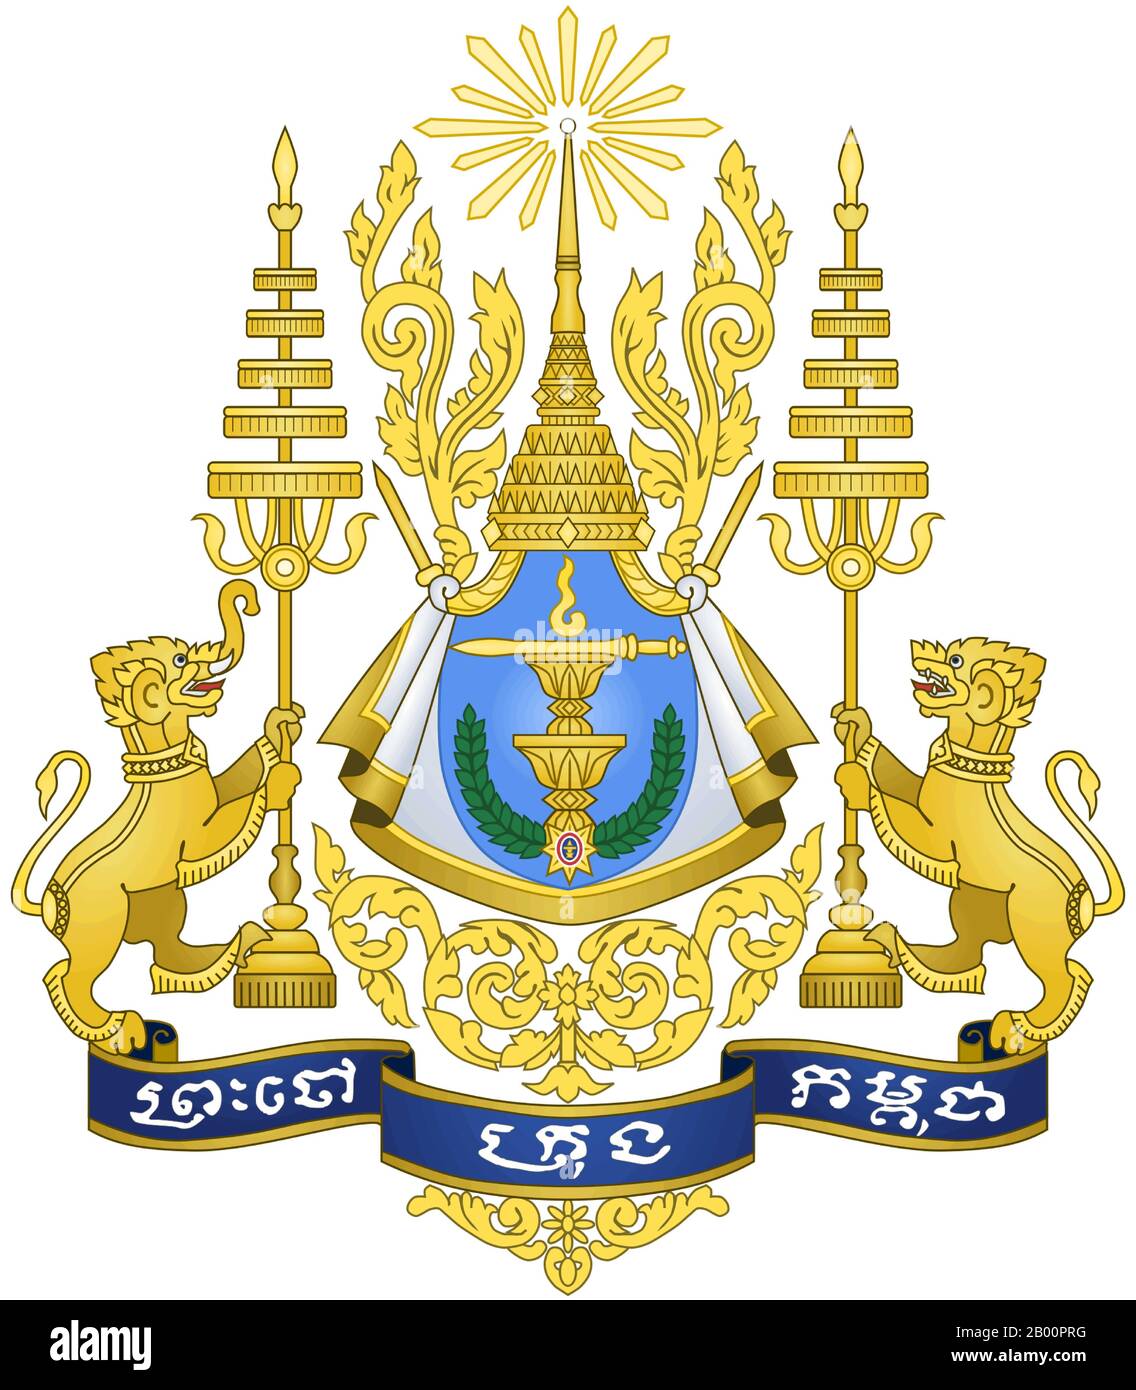 Cambodia: Royal Coat of Arms. Sodacan (CC BY 2.0 License).  The royal coat of arms of the Kingdom of Cambodia is the symbol of the Cambodian monarchy. It has existed in some form close to the one depicted since the establishment of the independent Kingdom of Cambodia in 1953. It is the symbol on the Royal Standard of the reigning monarch of Cambodia, Norodom Sihamoni (ascended 2004). Stock Photo